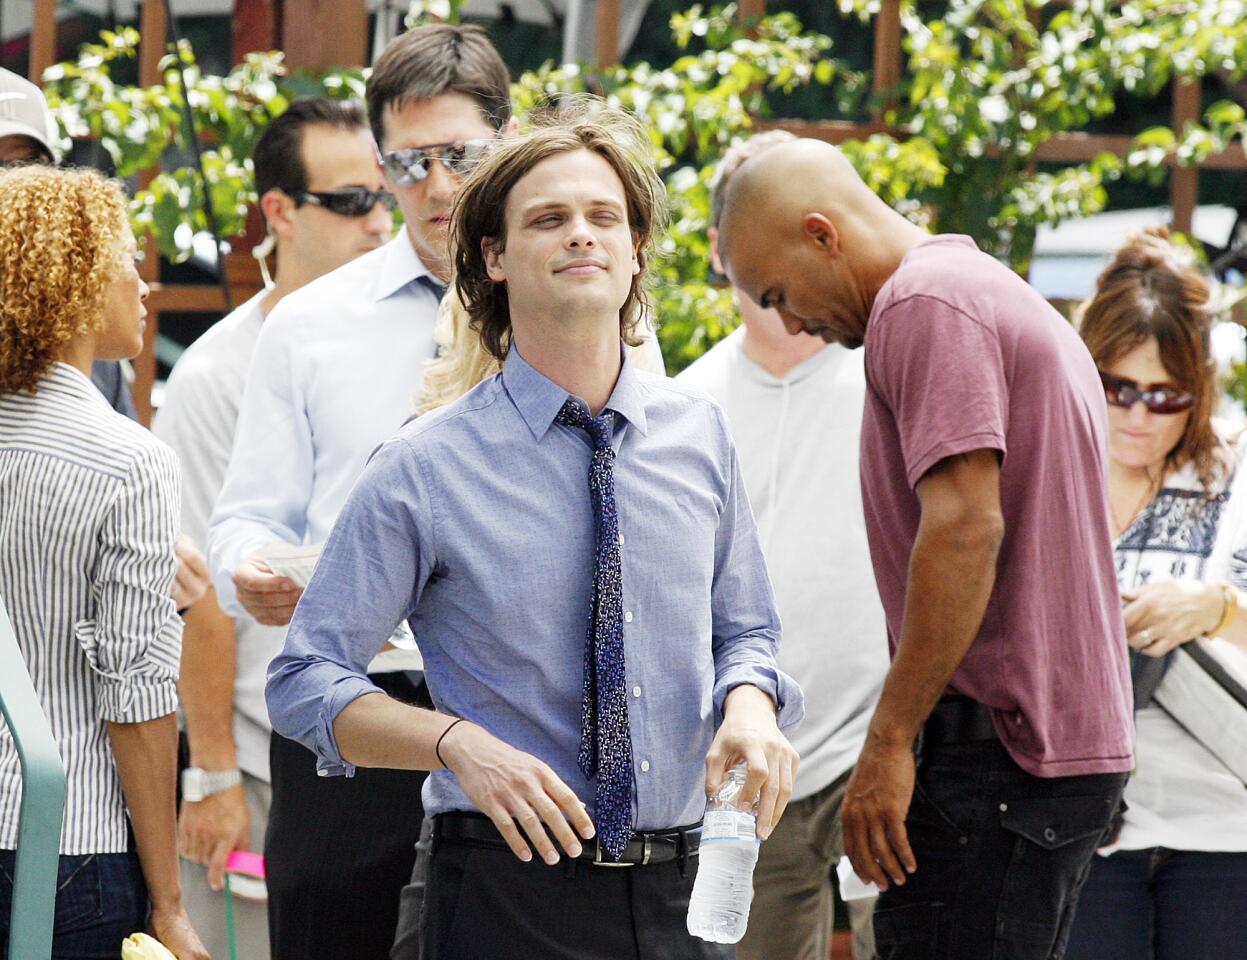 Matthew Gray Gubler, who plays Spencer Reid on the crime drama Criminal Minds moments before acting a scene in front of the Glendale Police Department.